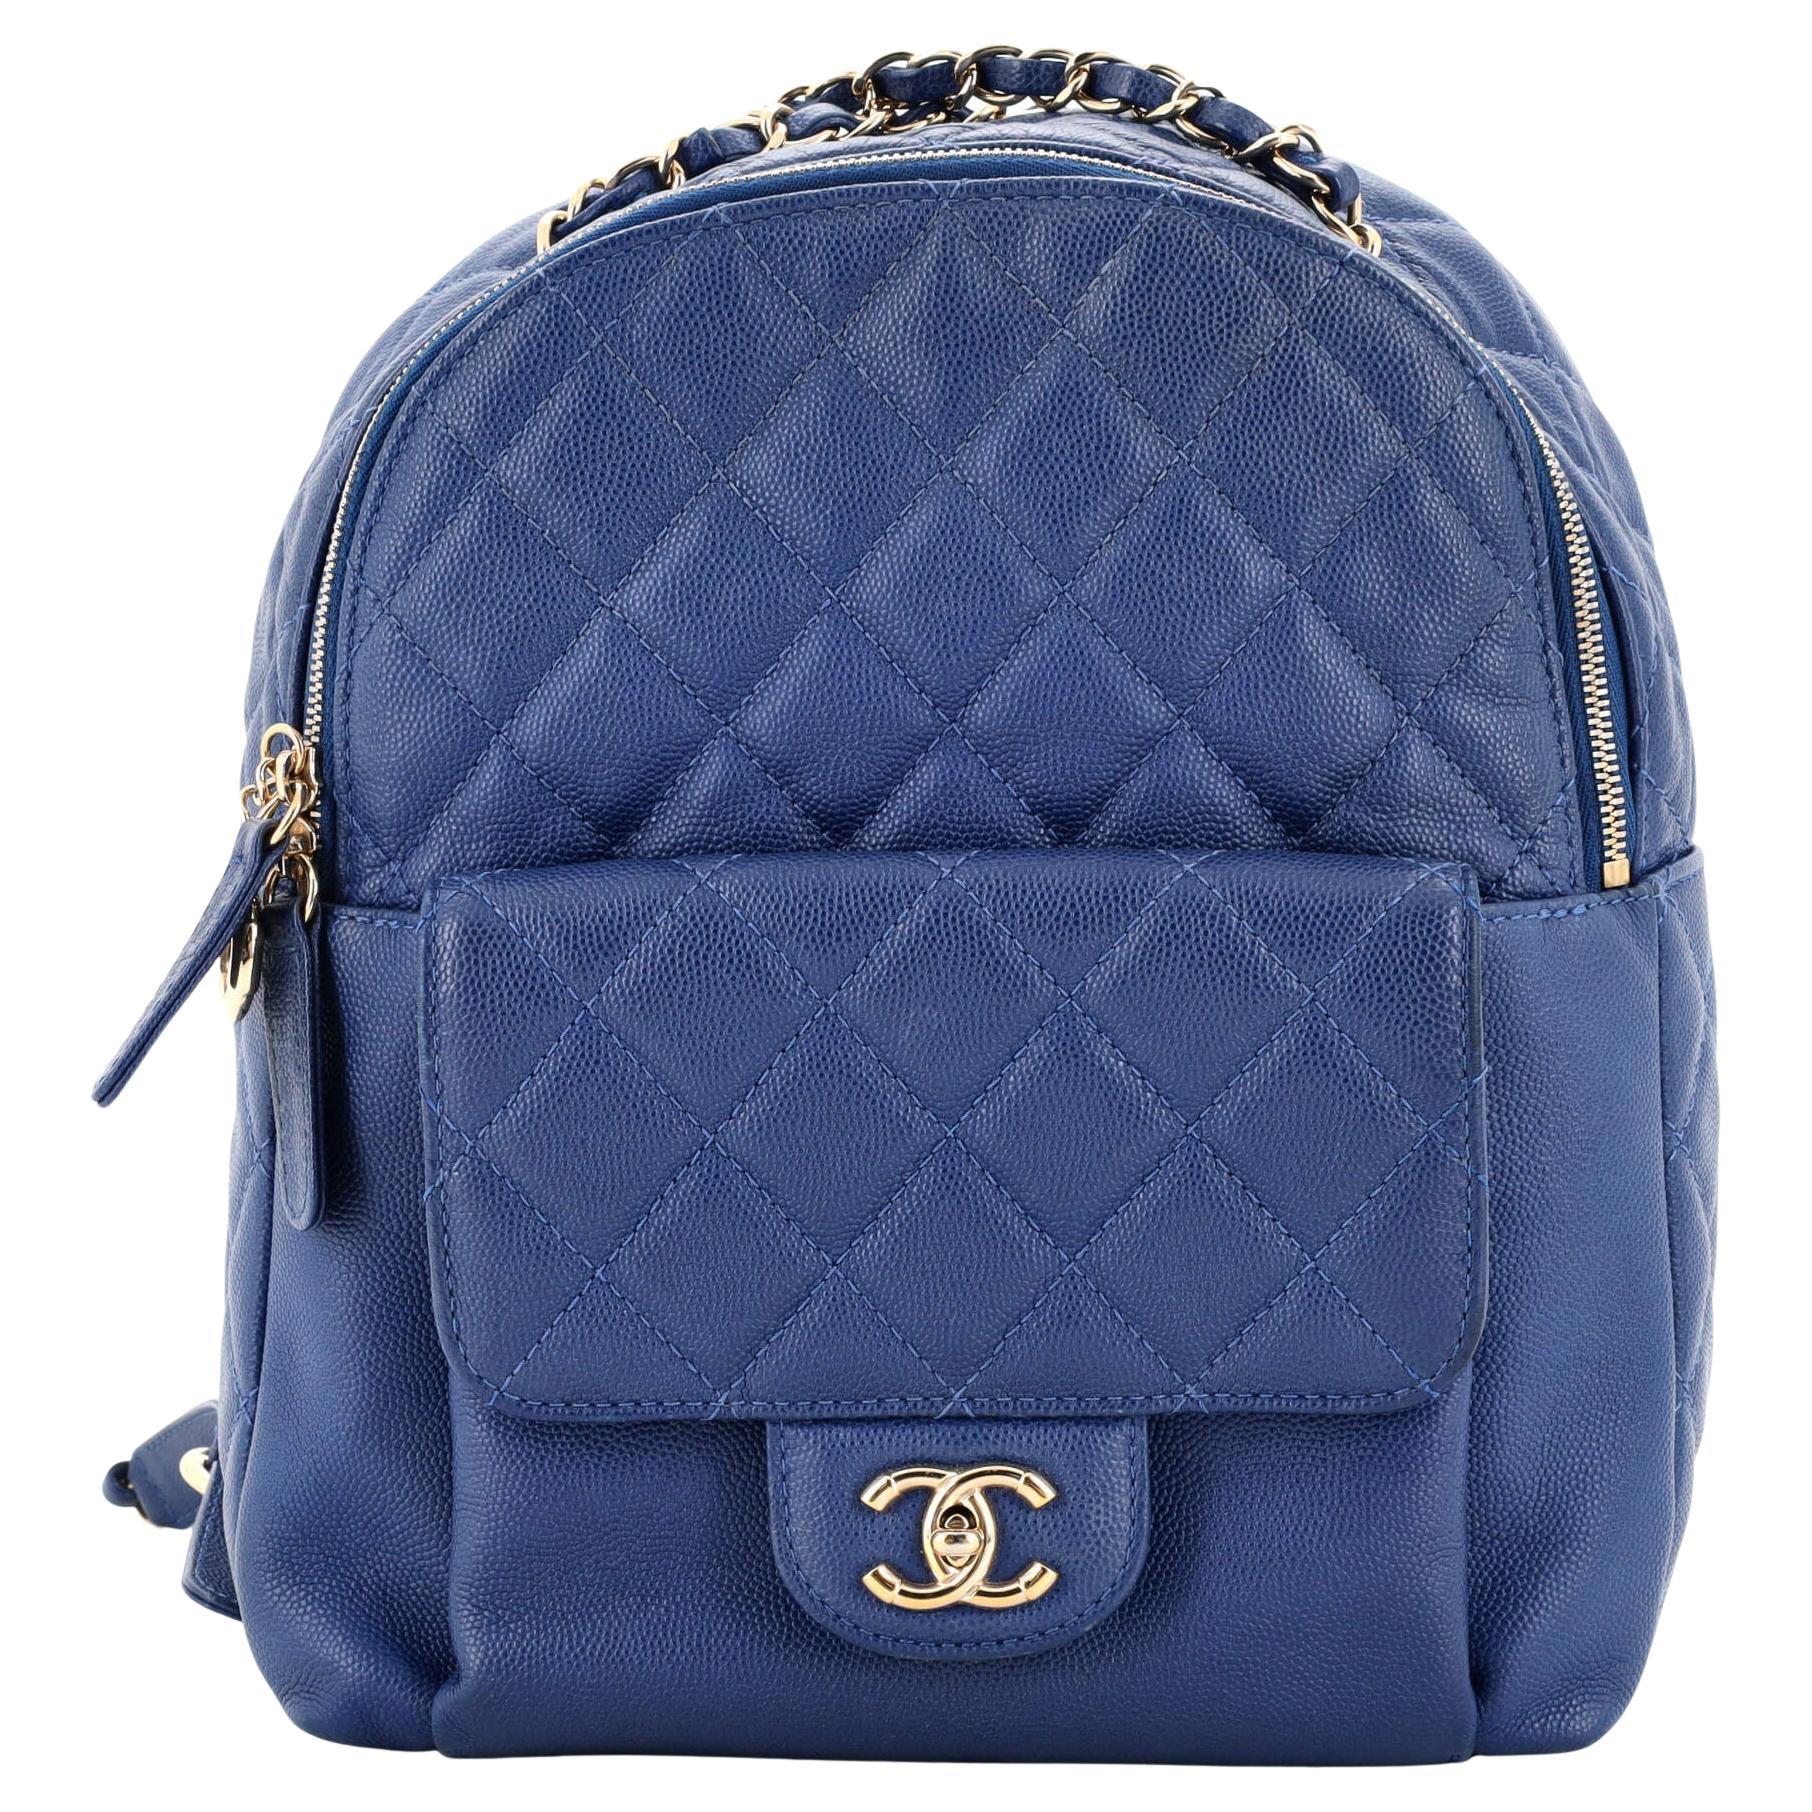 Chanel Spring/Summer 2018 Act II Blue Sequin Coco Cuba Backpack